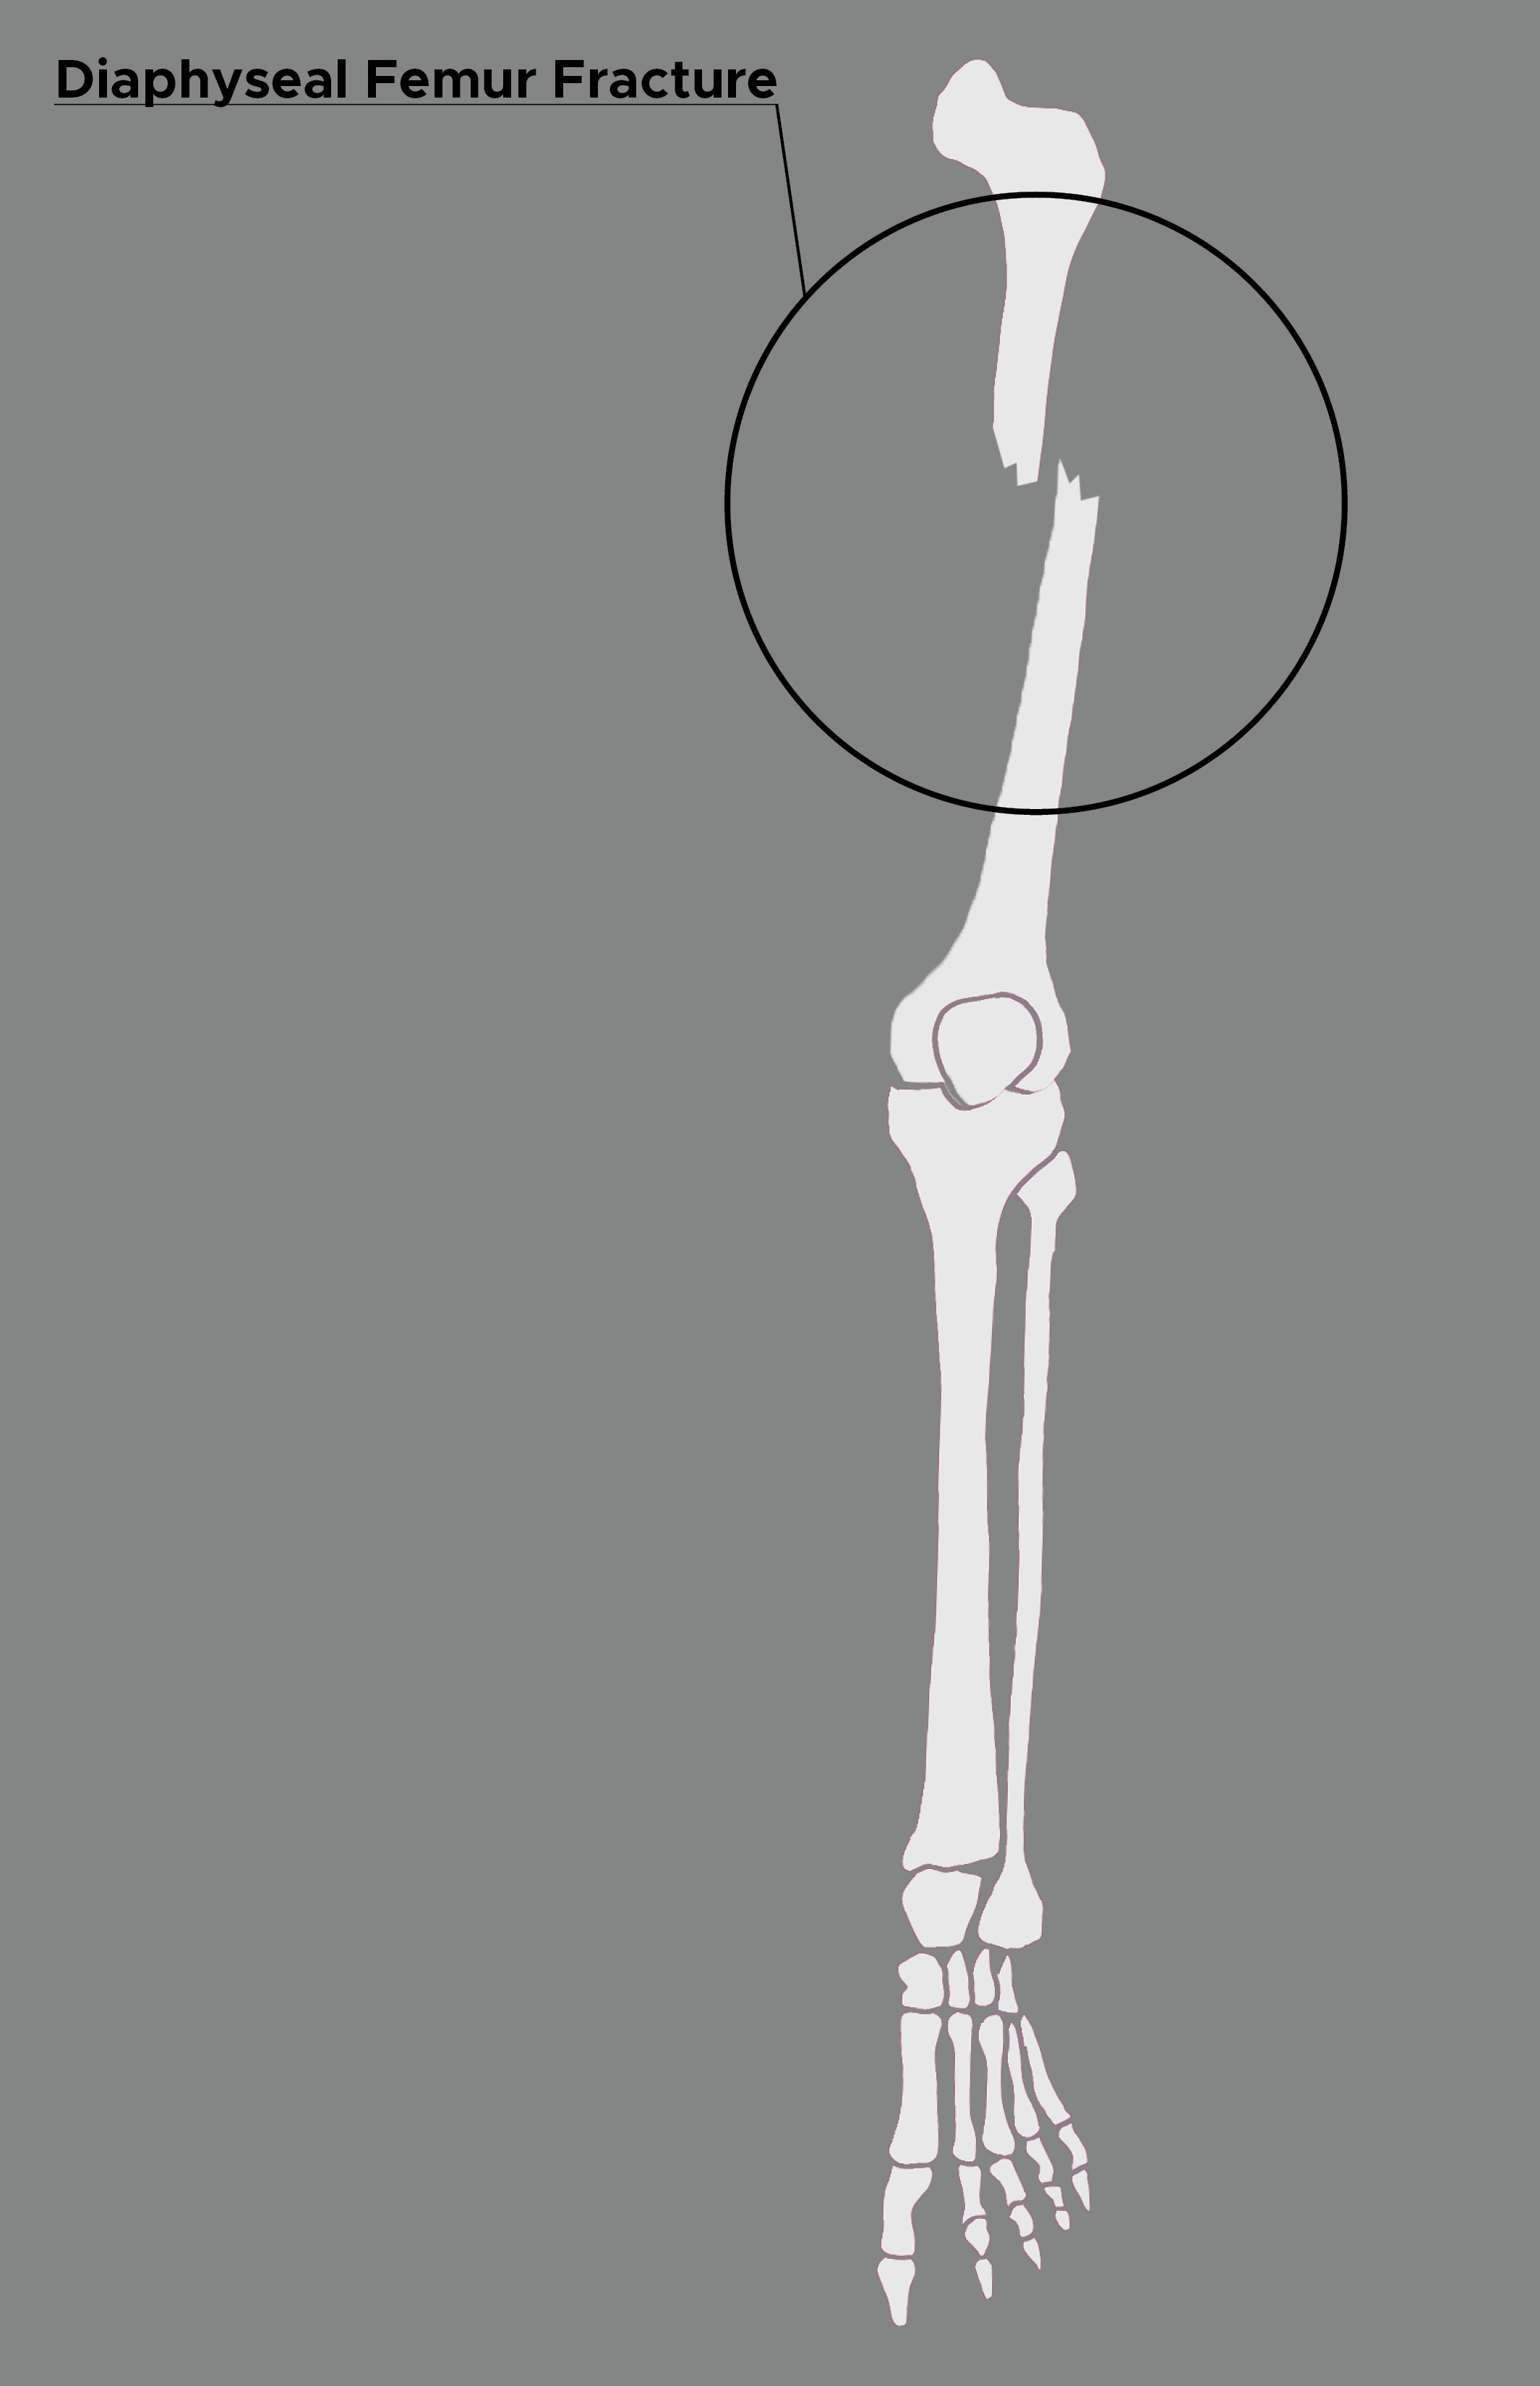 Illustration of femur with Diaphyseal fracture